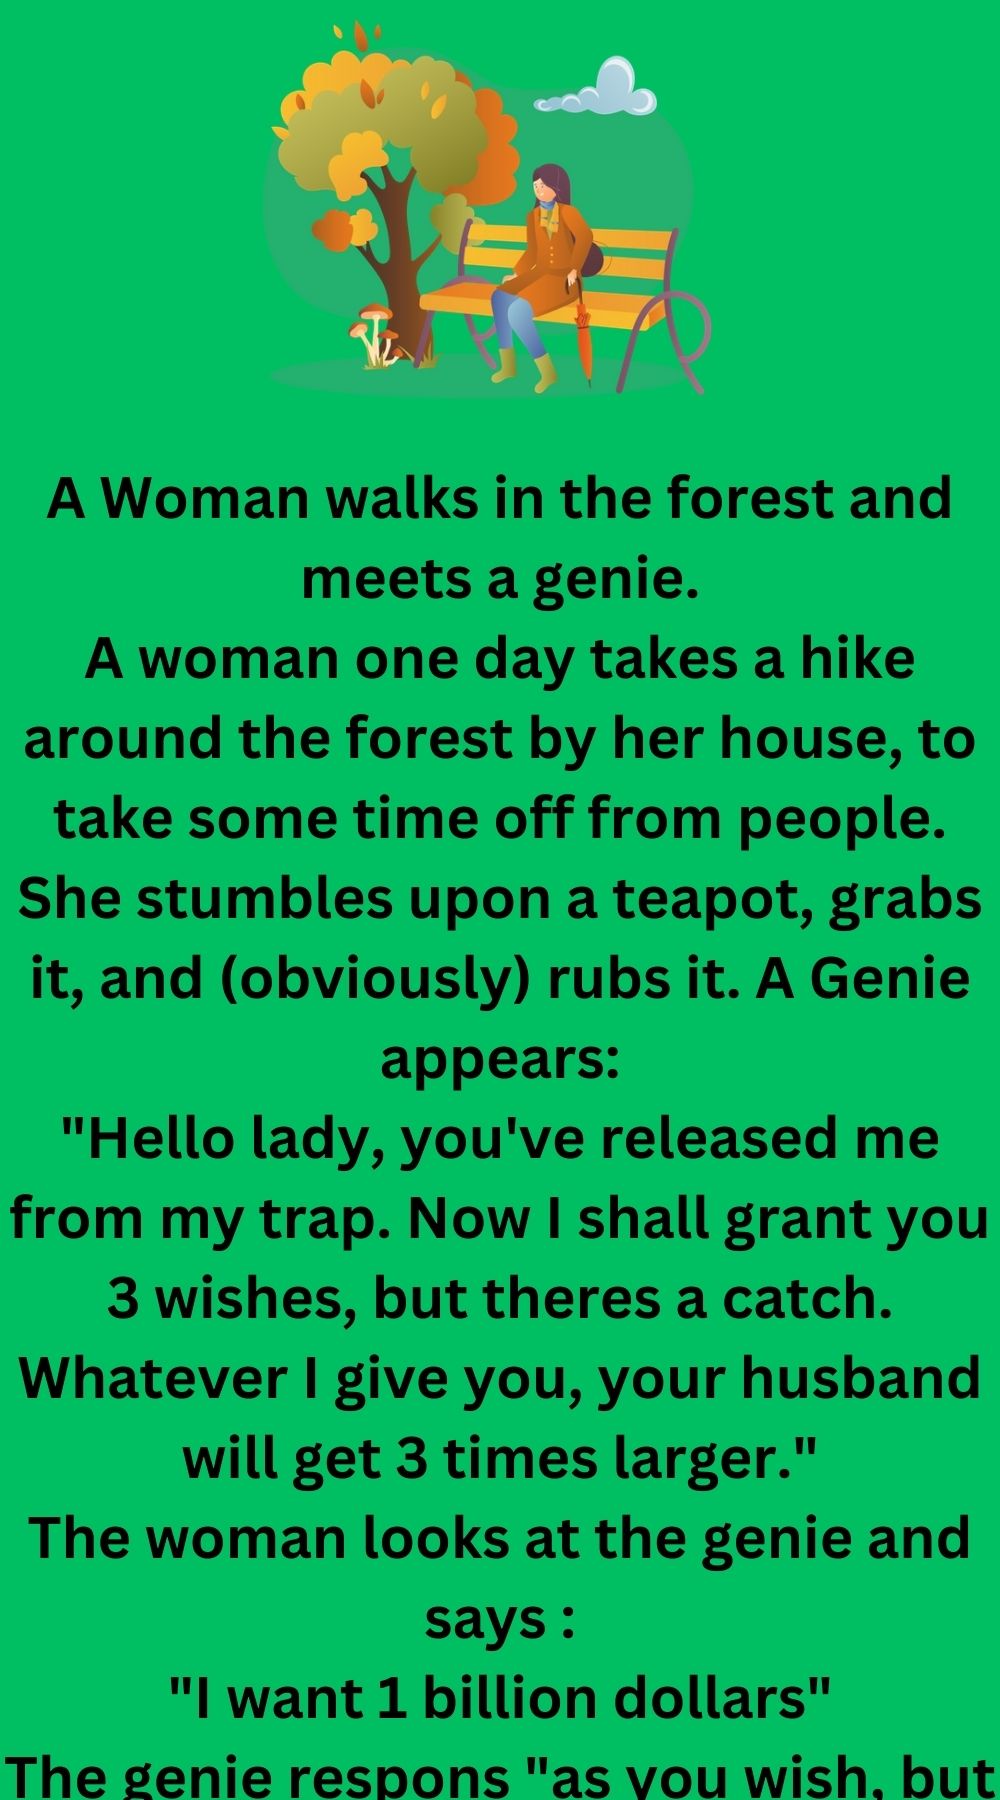 A Woman walks in the forest 